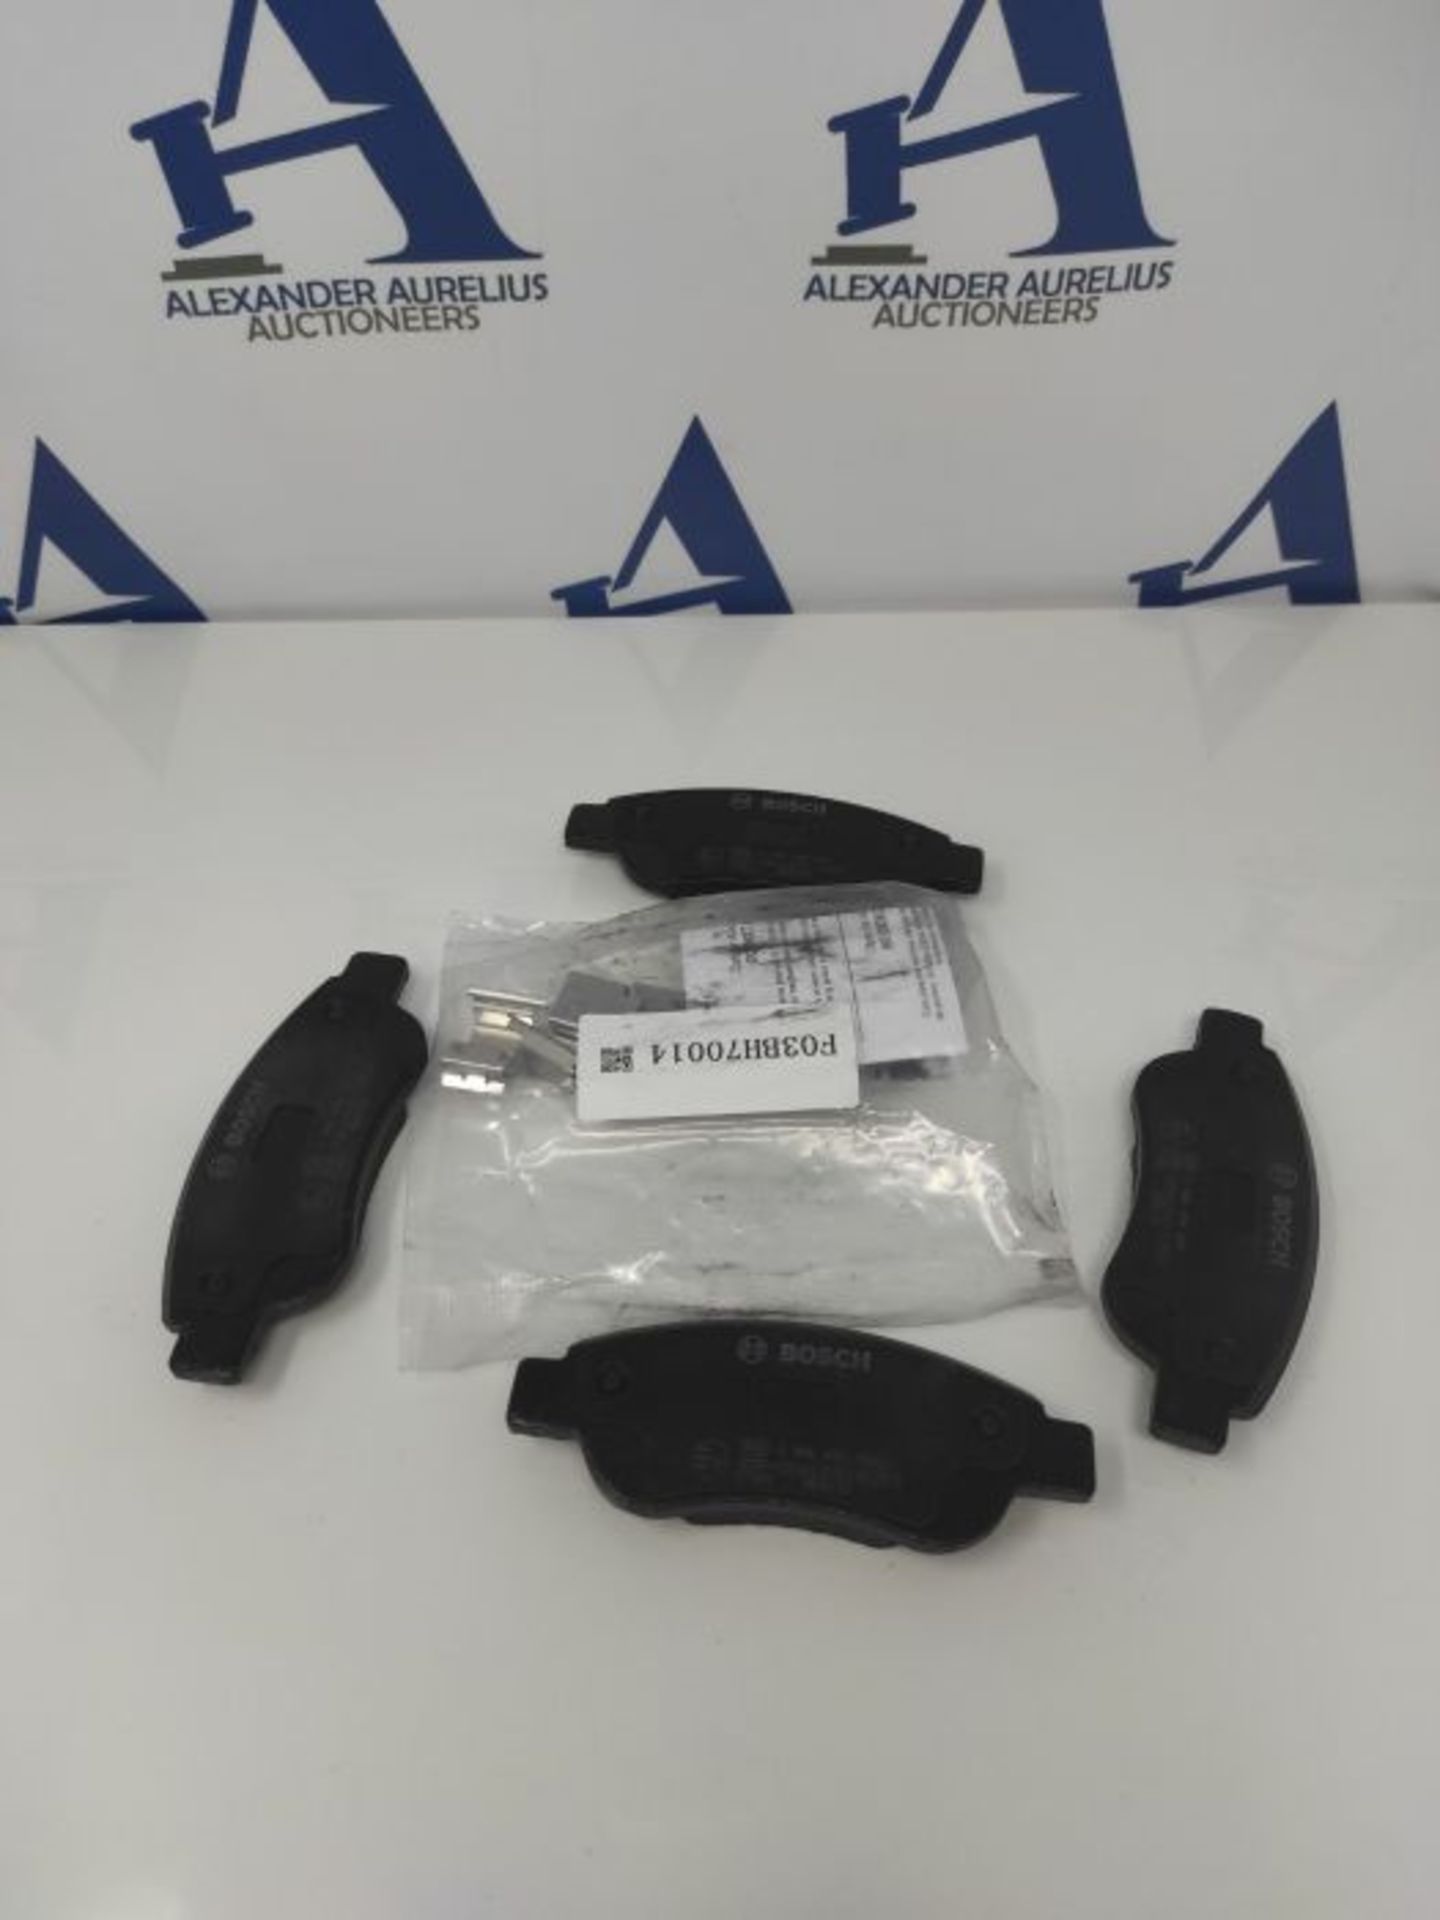 Bosch BP975 Brake Pads - Front Axle - ECE-R90 Certified - 1 Set of 4 Pads - Image 3 of 3